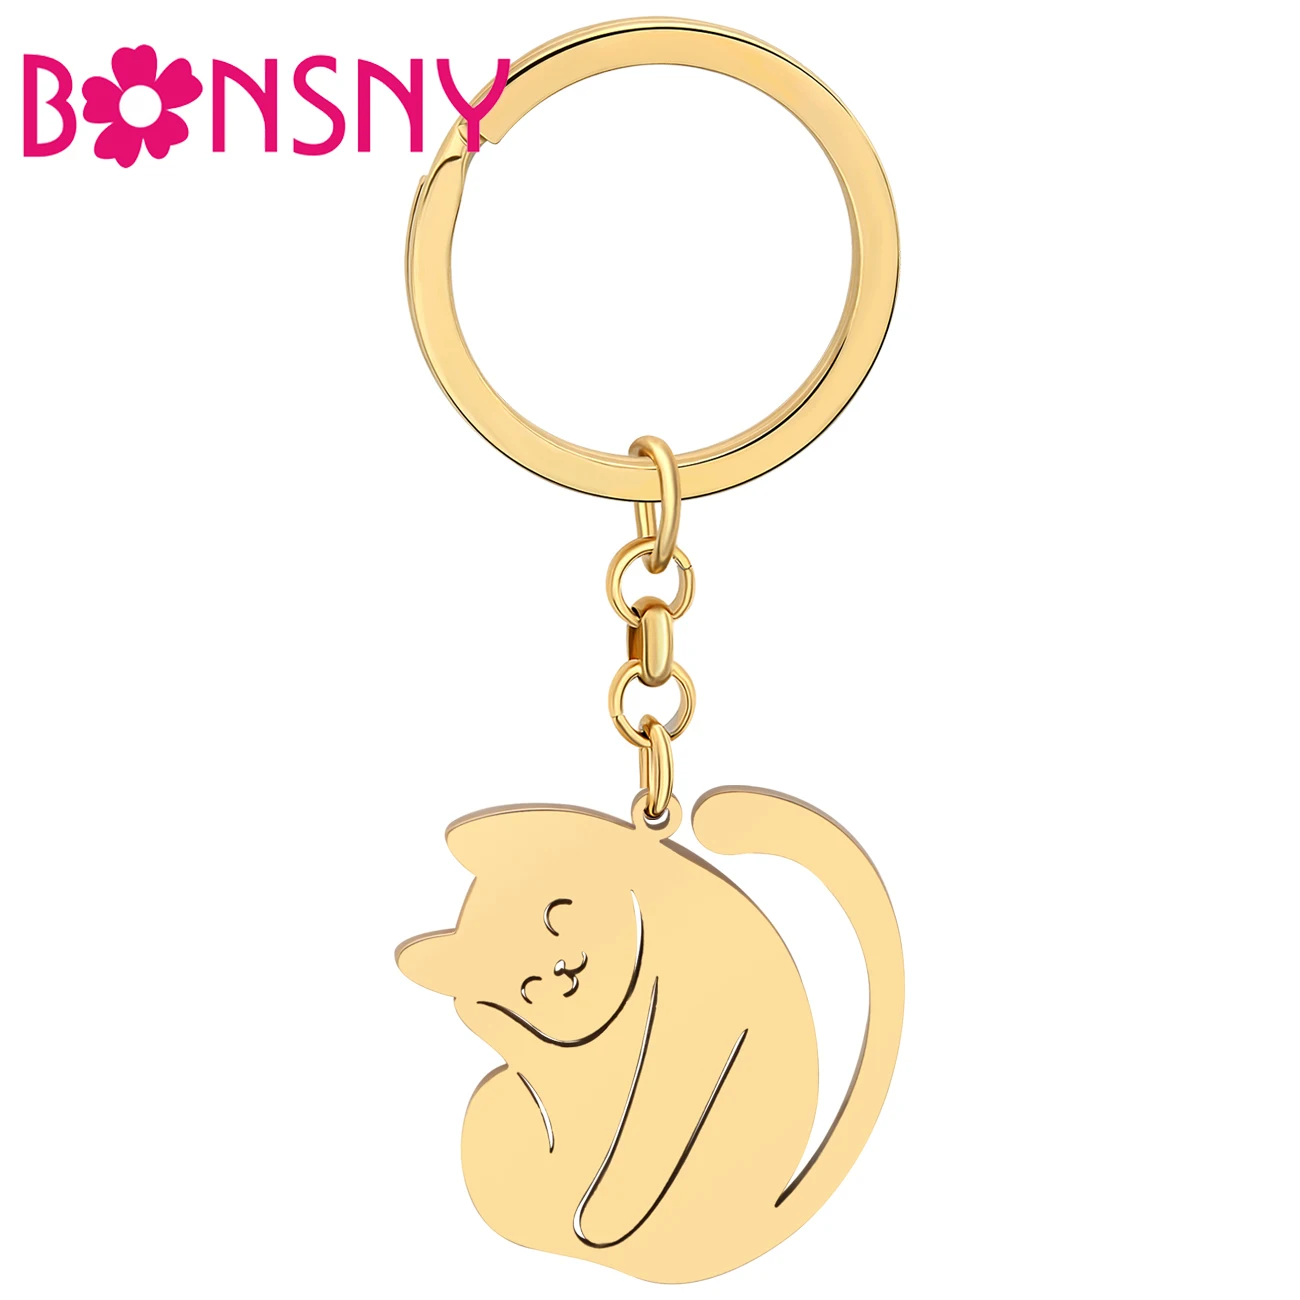 

Bonsny Stainless Steel Gold-plated Cute Smile Cat Keychains Pet Wallets Charm Key Chains Keyring Decoration For Women Teens Gift